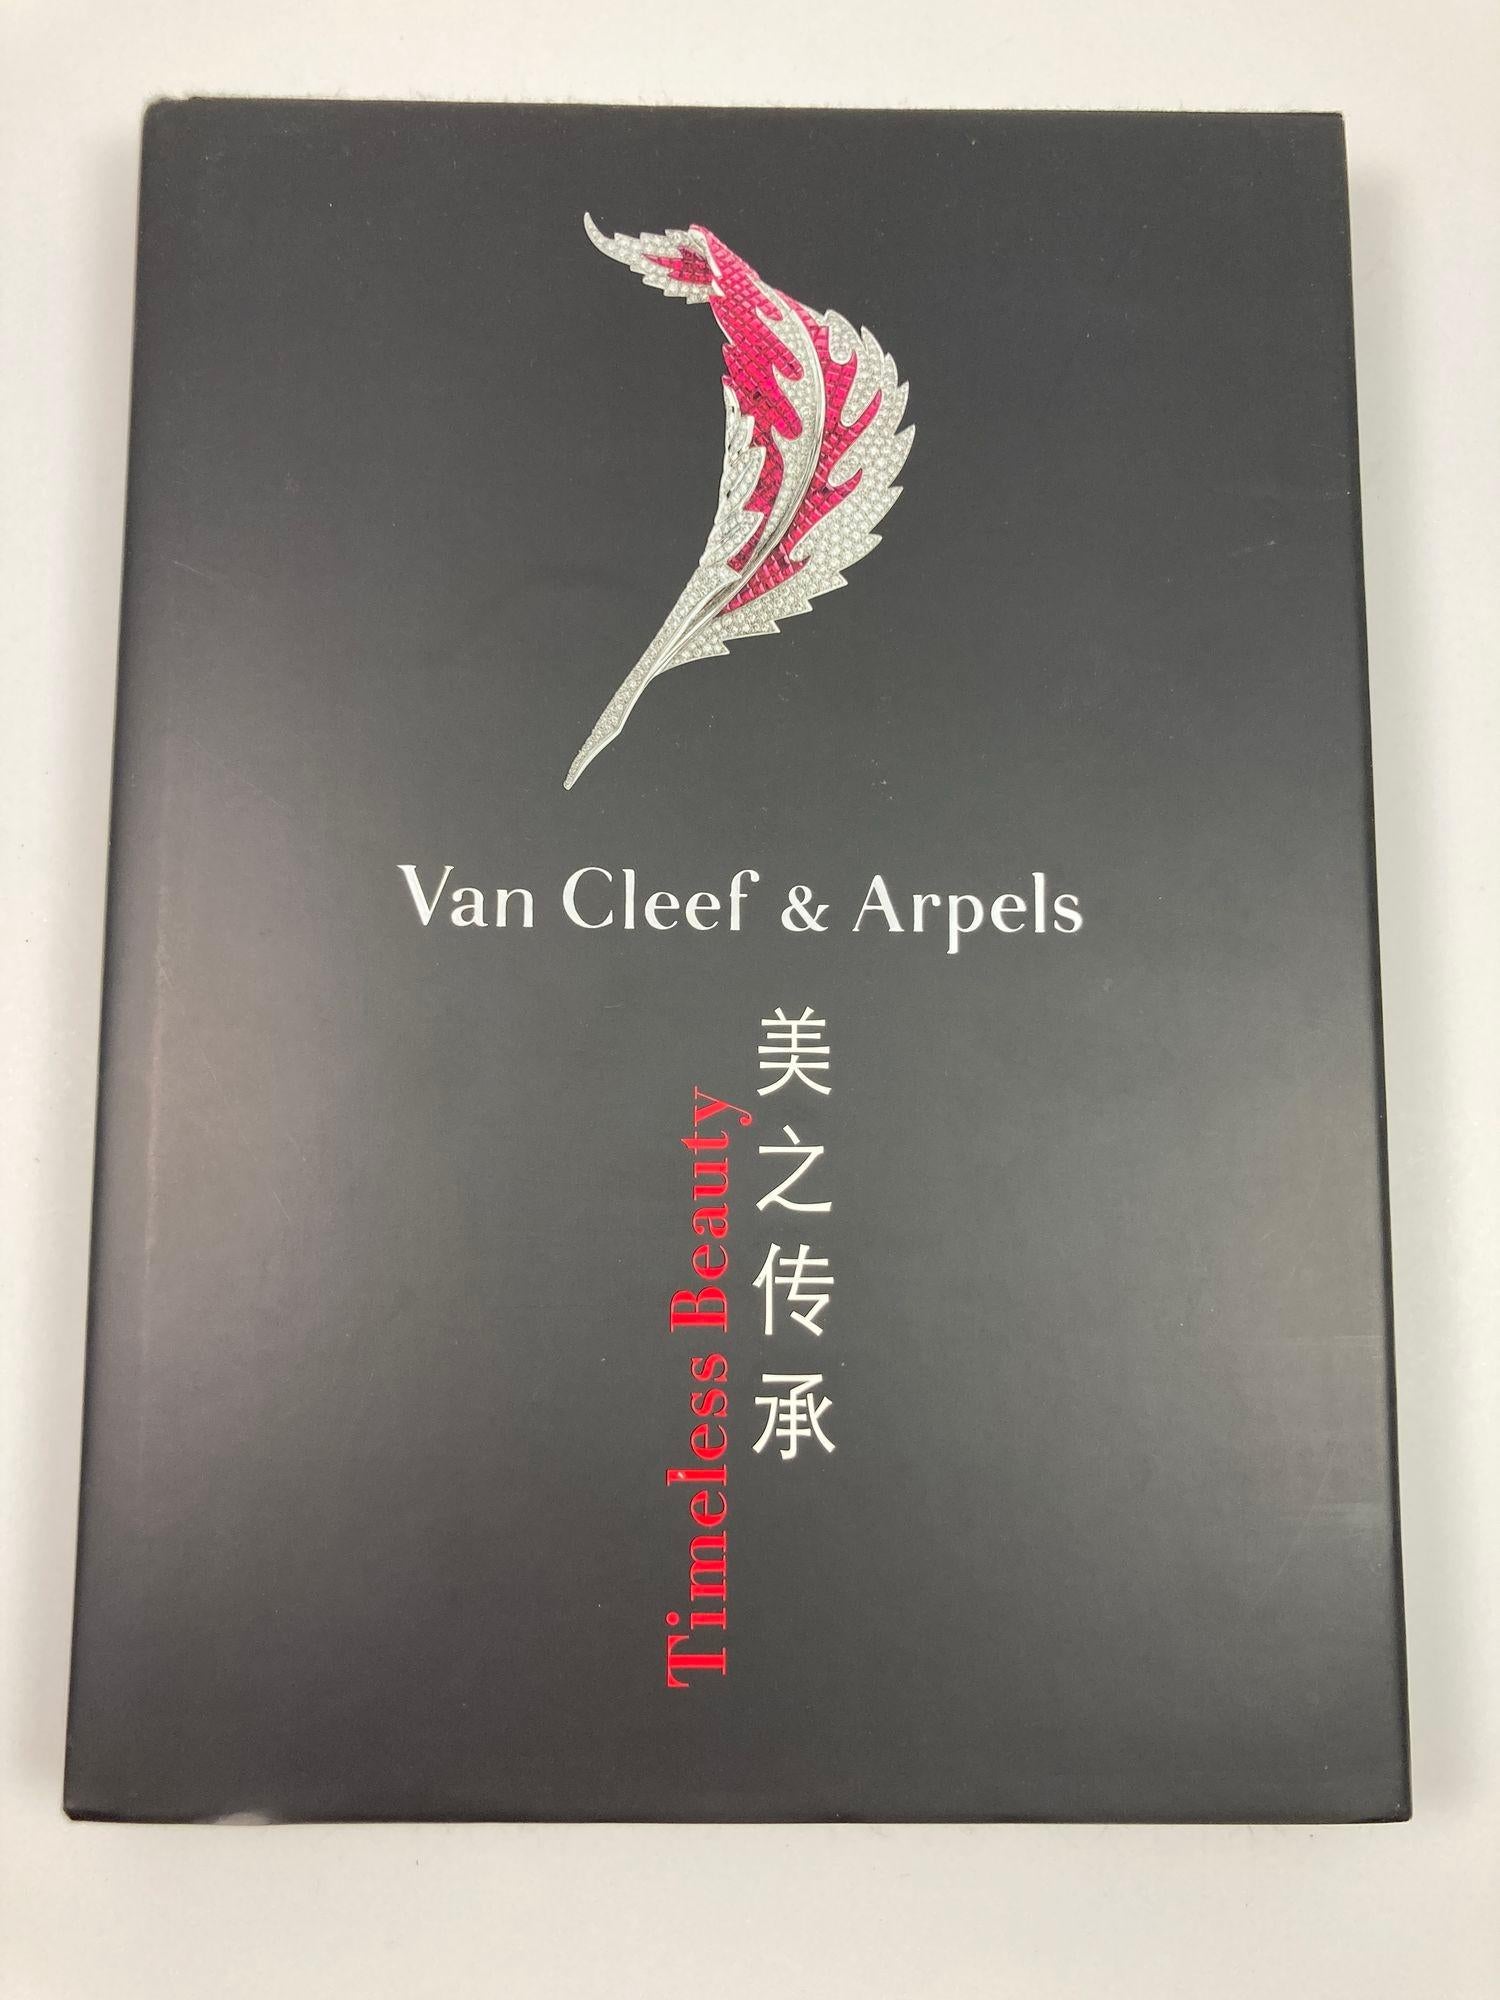 Empire Revival Van Cleef & Arpels: Timeless Beauty Hardcover Book 2012 For Sale